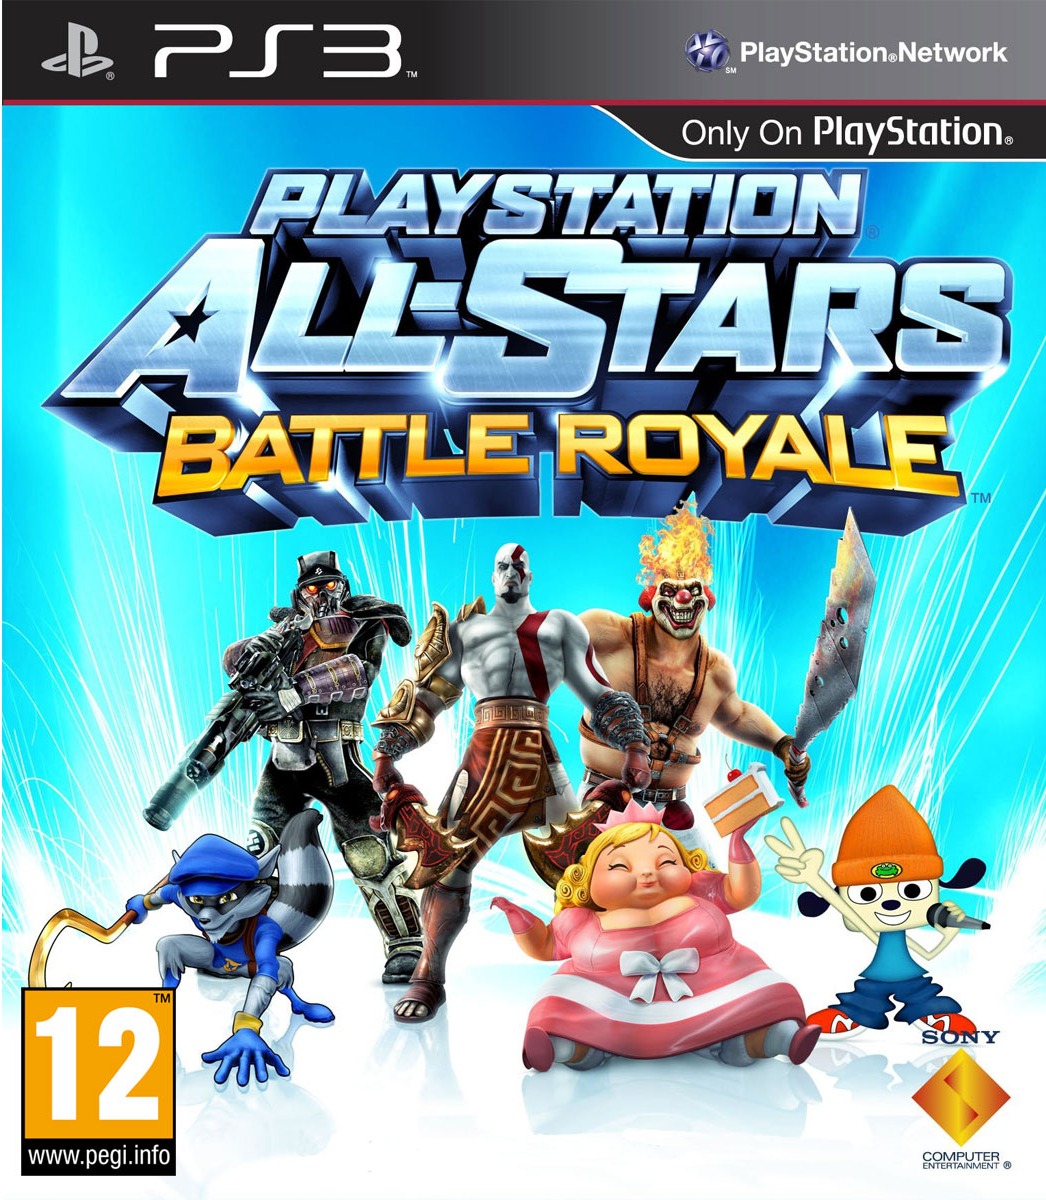 PS3 - Playstation All Stars Battle Royale